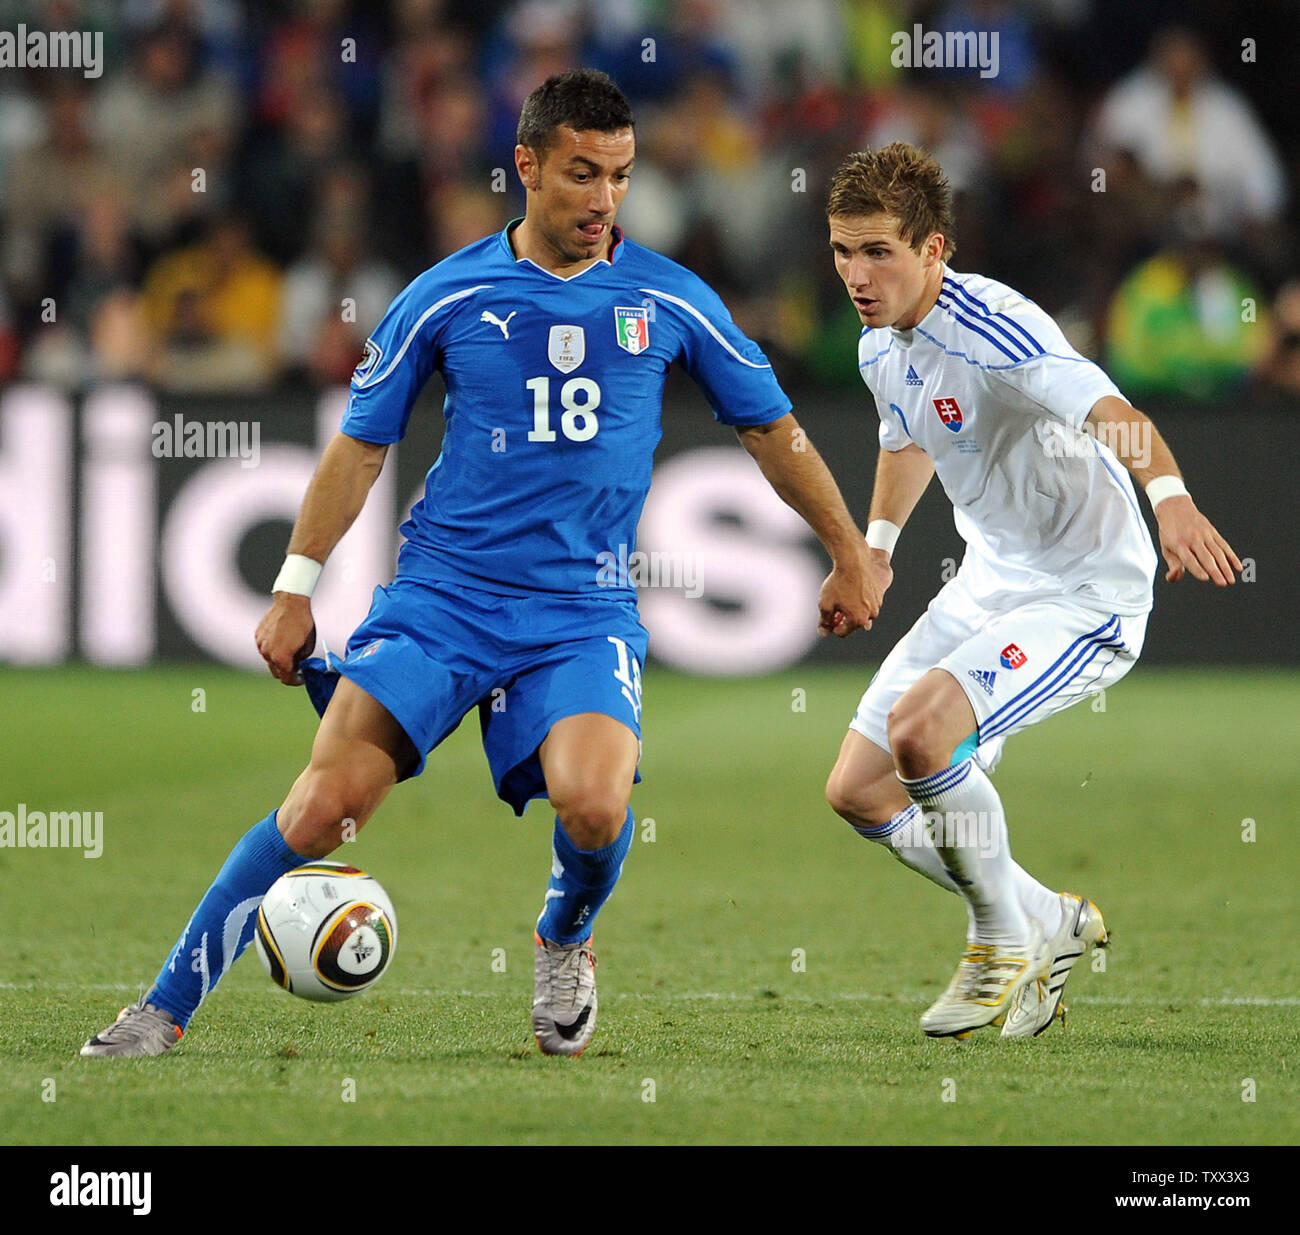 Peter Pekarik of Slovakia and Fabio Quagliarella of Italy chase the ball during the Group F match at Ellis Park in Johannesburg, South Africa on June 24, 2010. UPI/Chris Brunskill Stock Photo